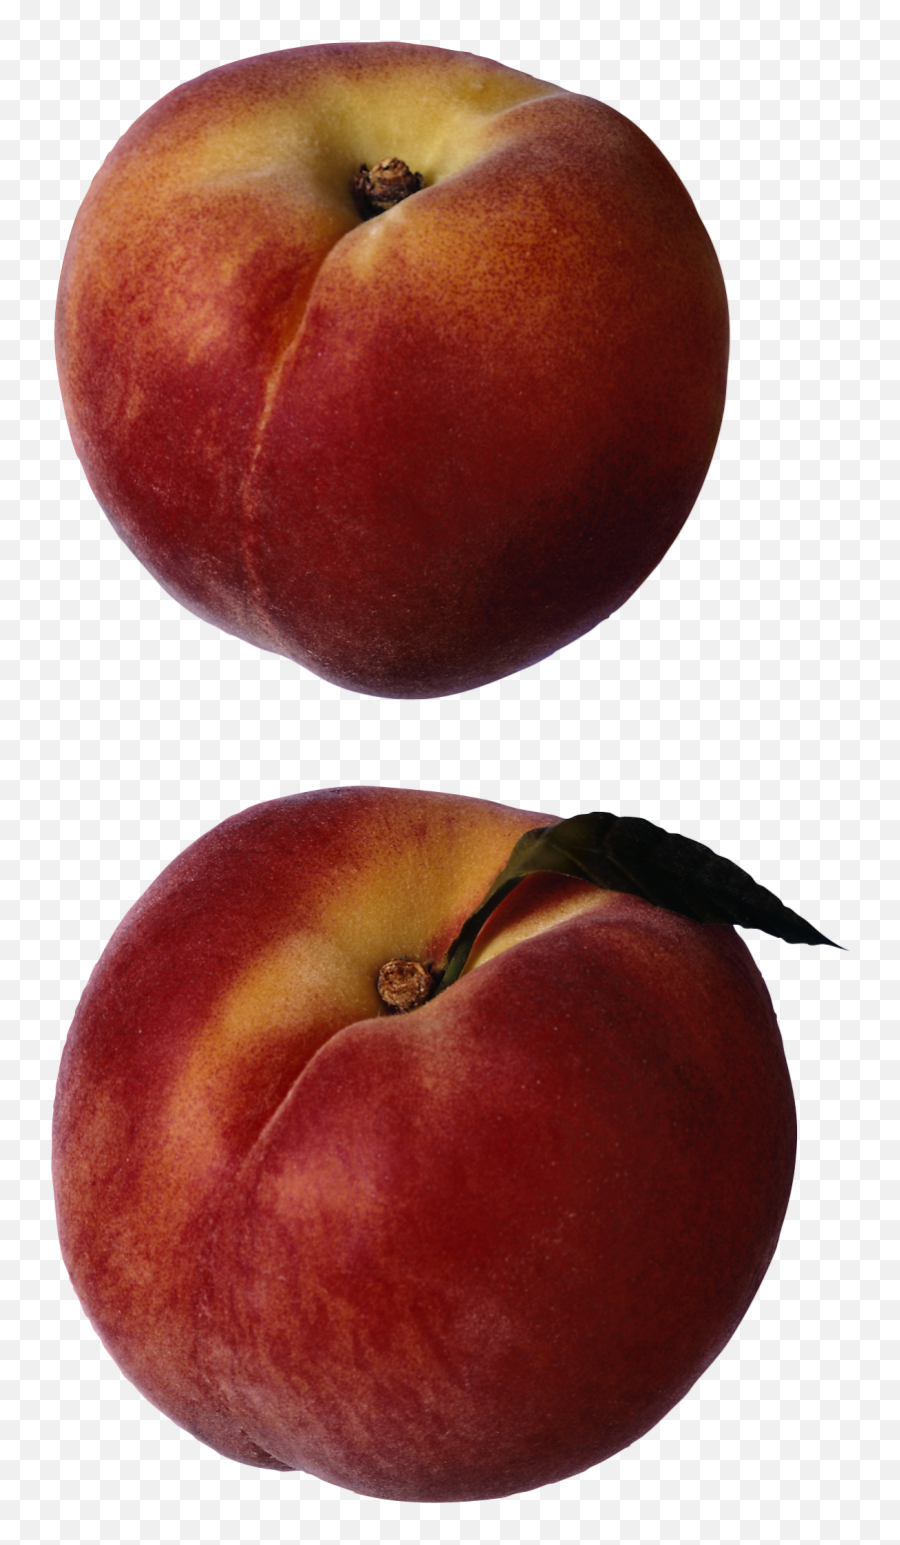 Peaches Png Image - Fruta Durazno,Peaches Png